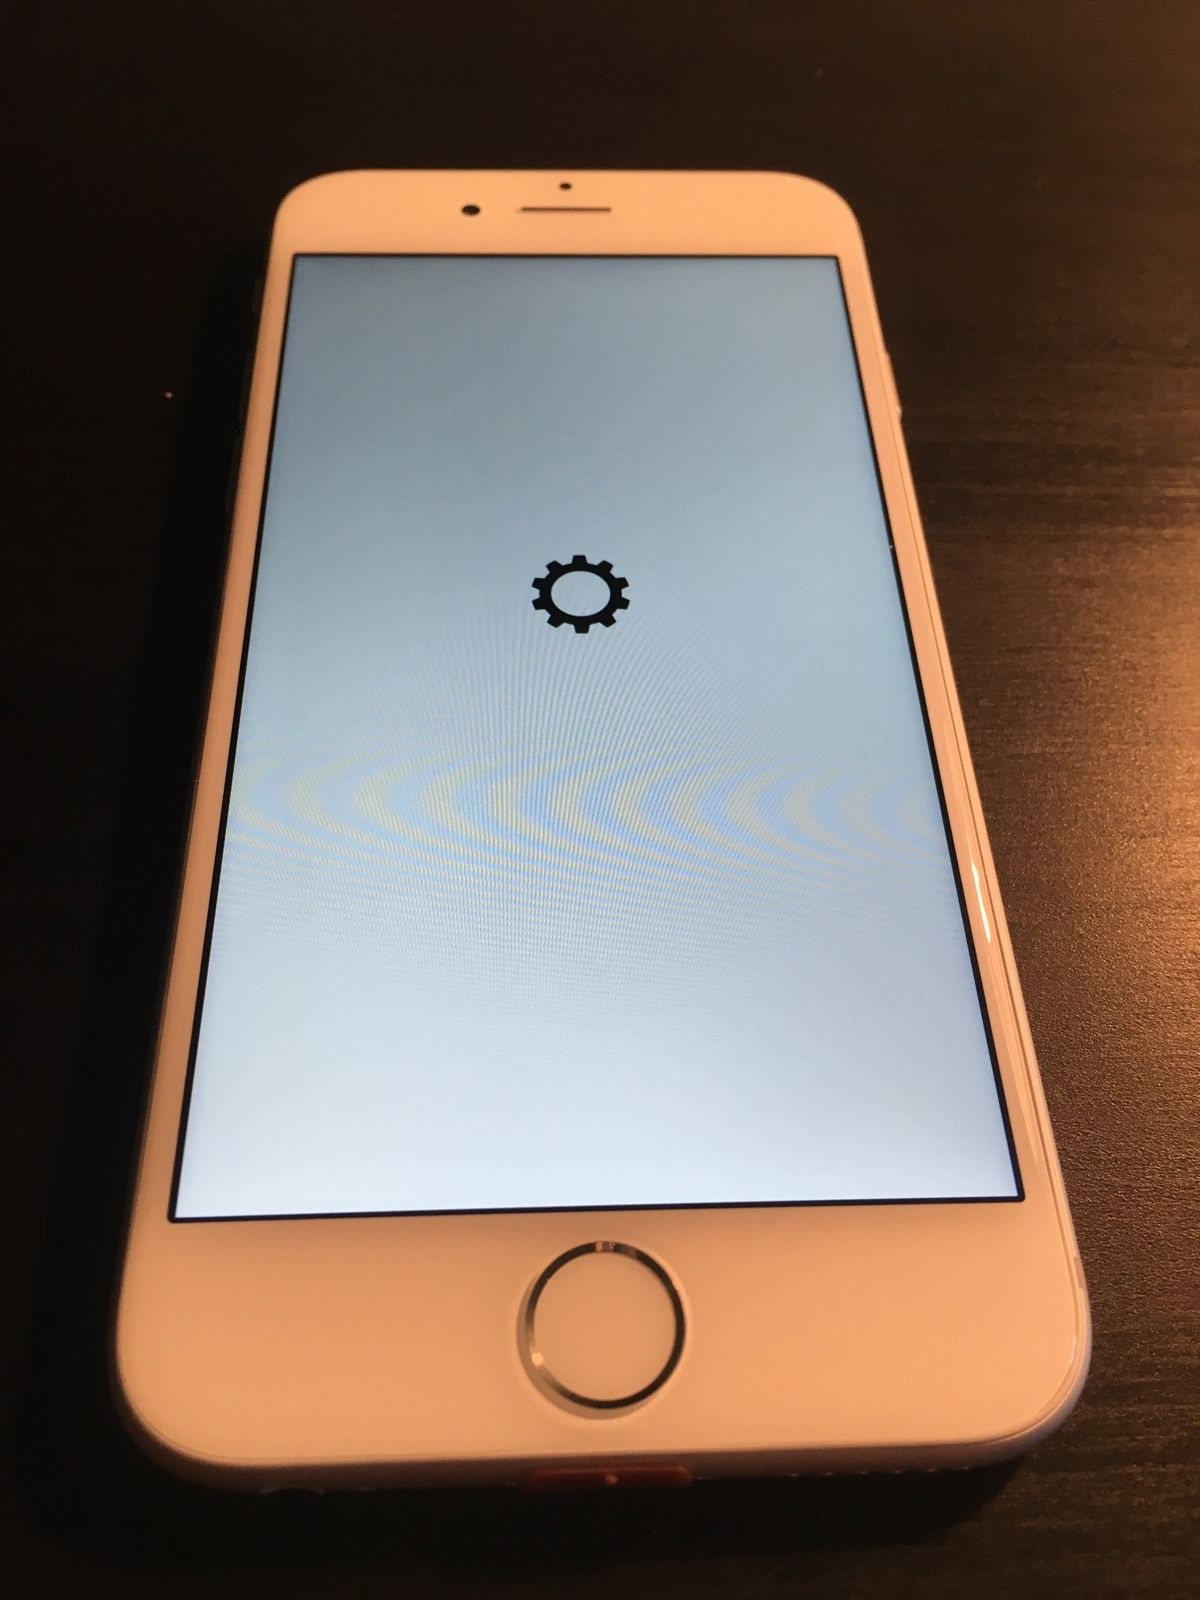 Prototype iPhone 6 Running SwitchBoard OS Surfaces For Sale on eBay - iClarified